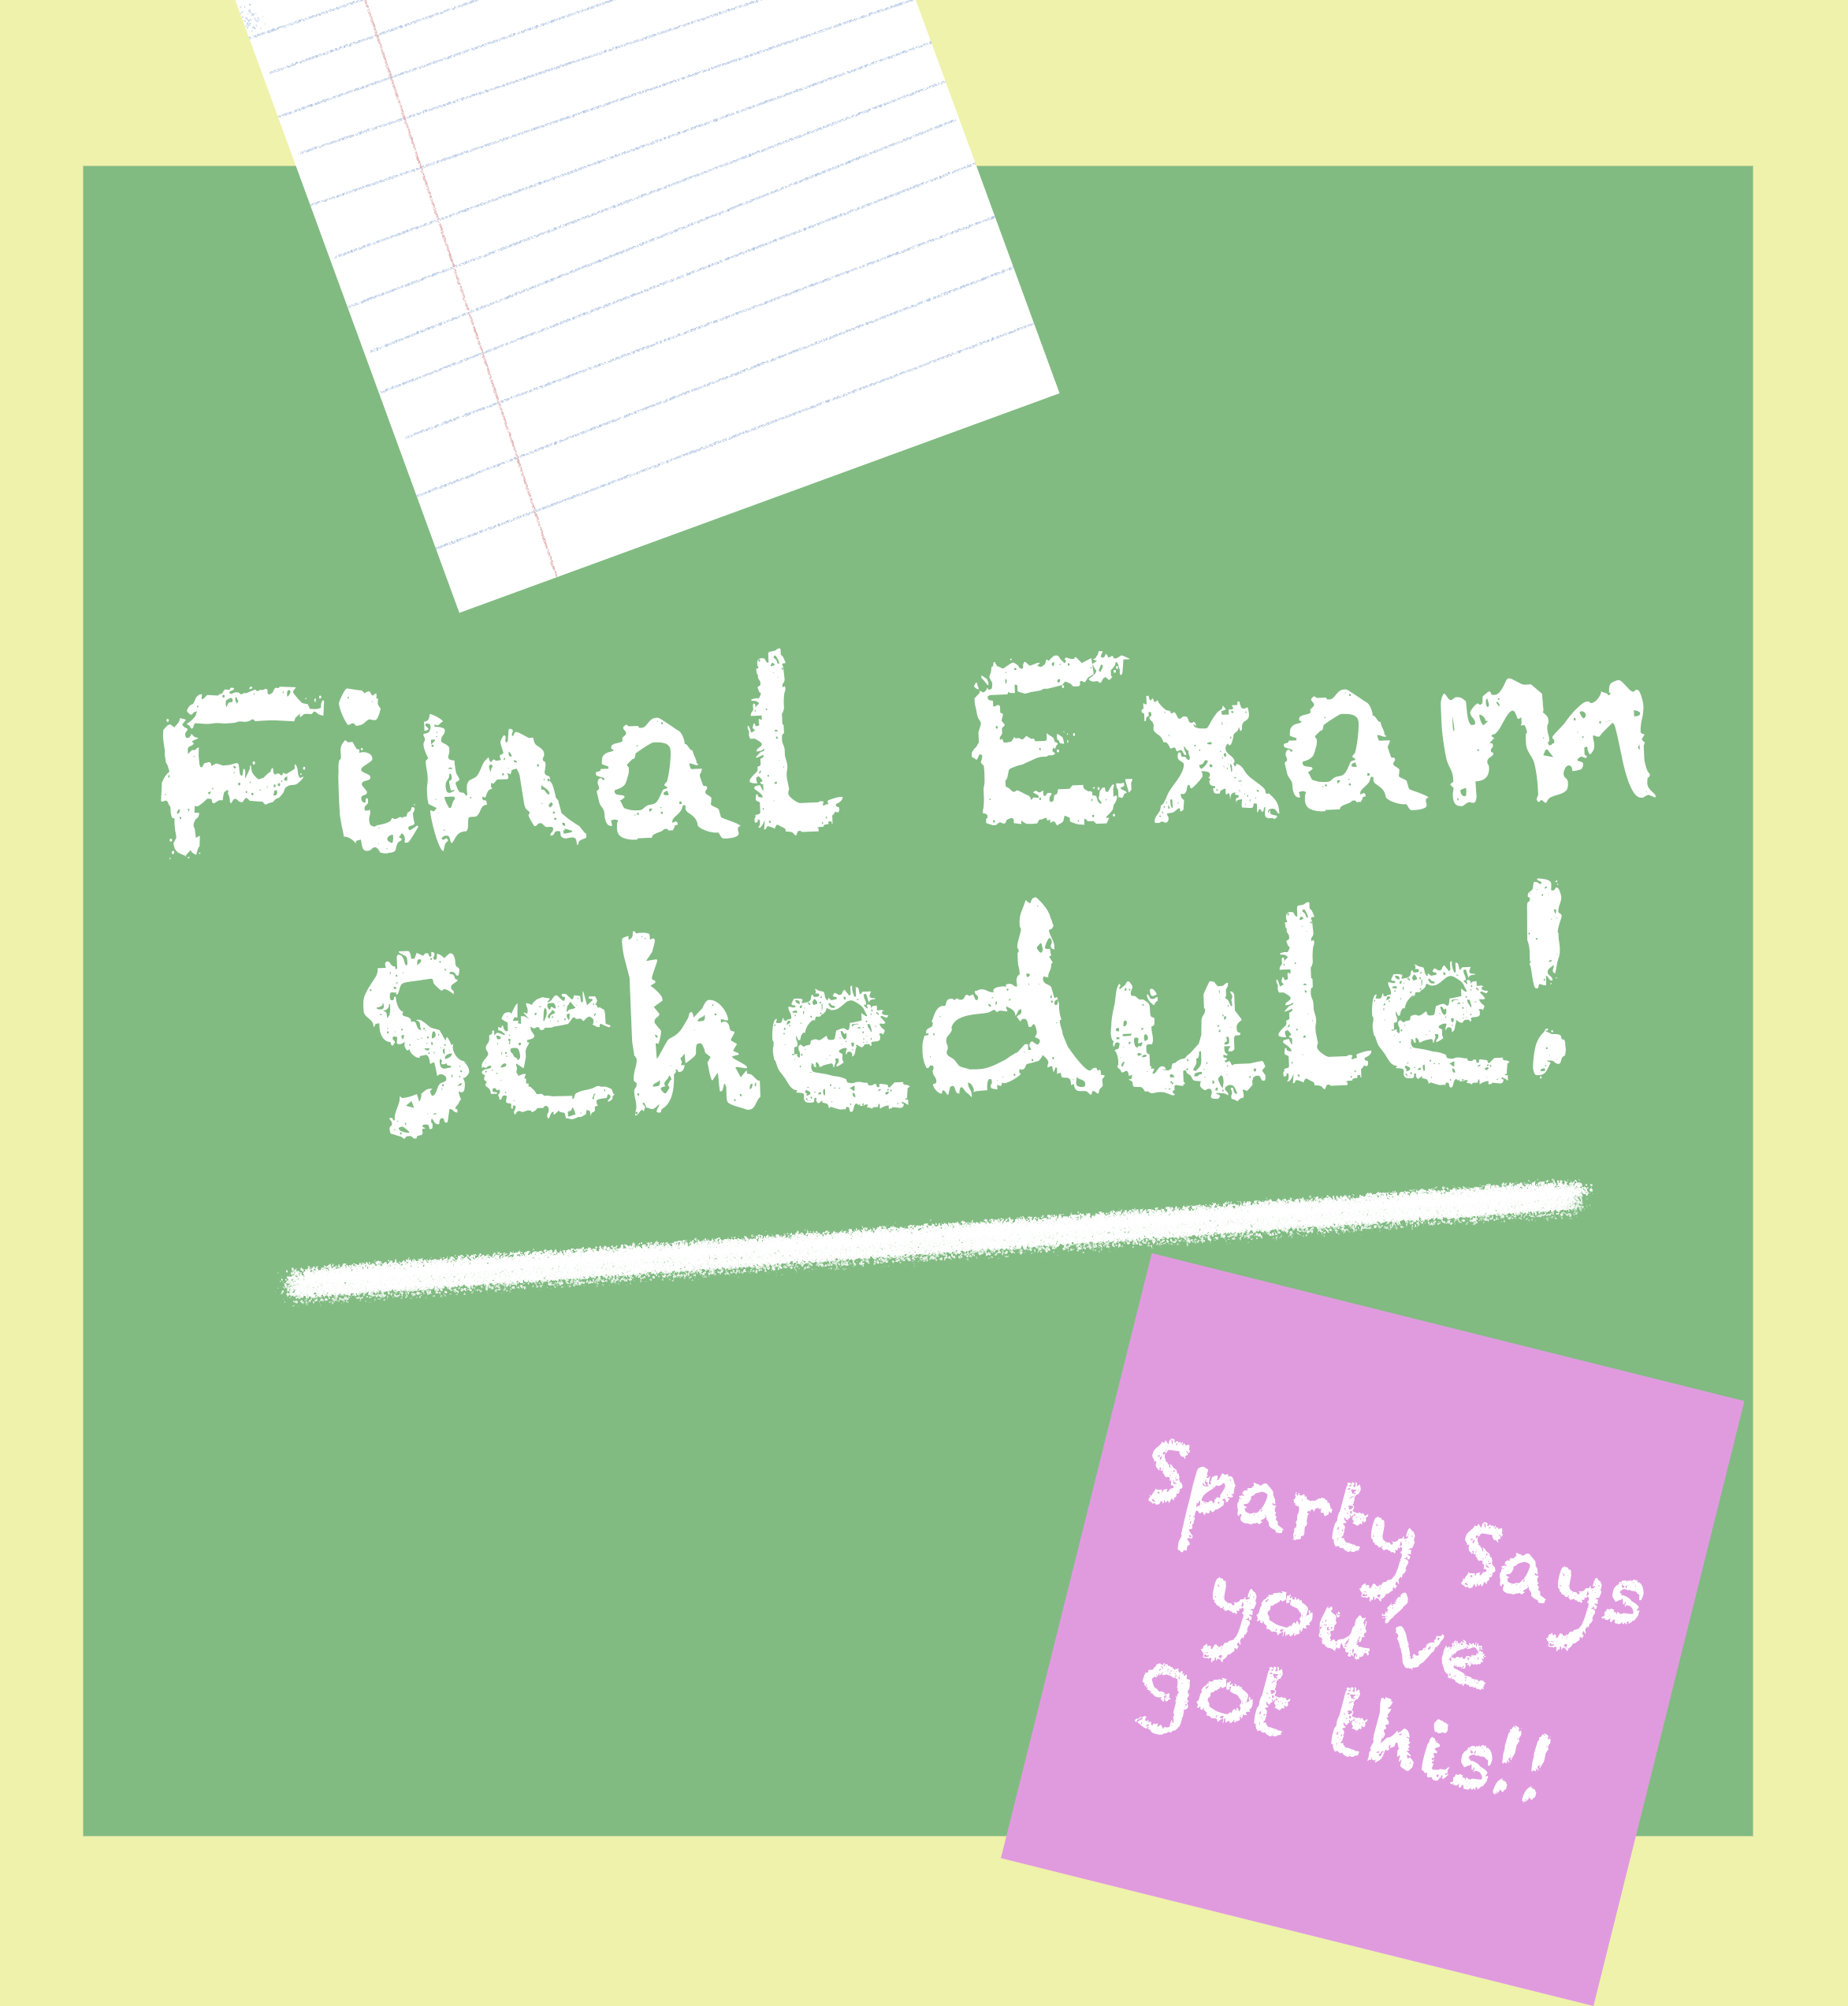 Final Exam Schedule! Sparty Says you've got this!